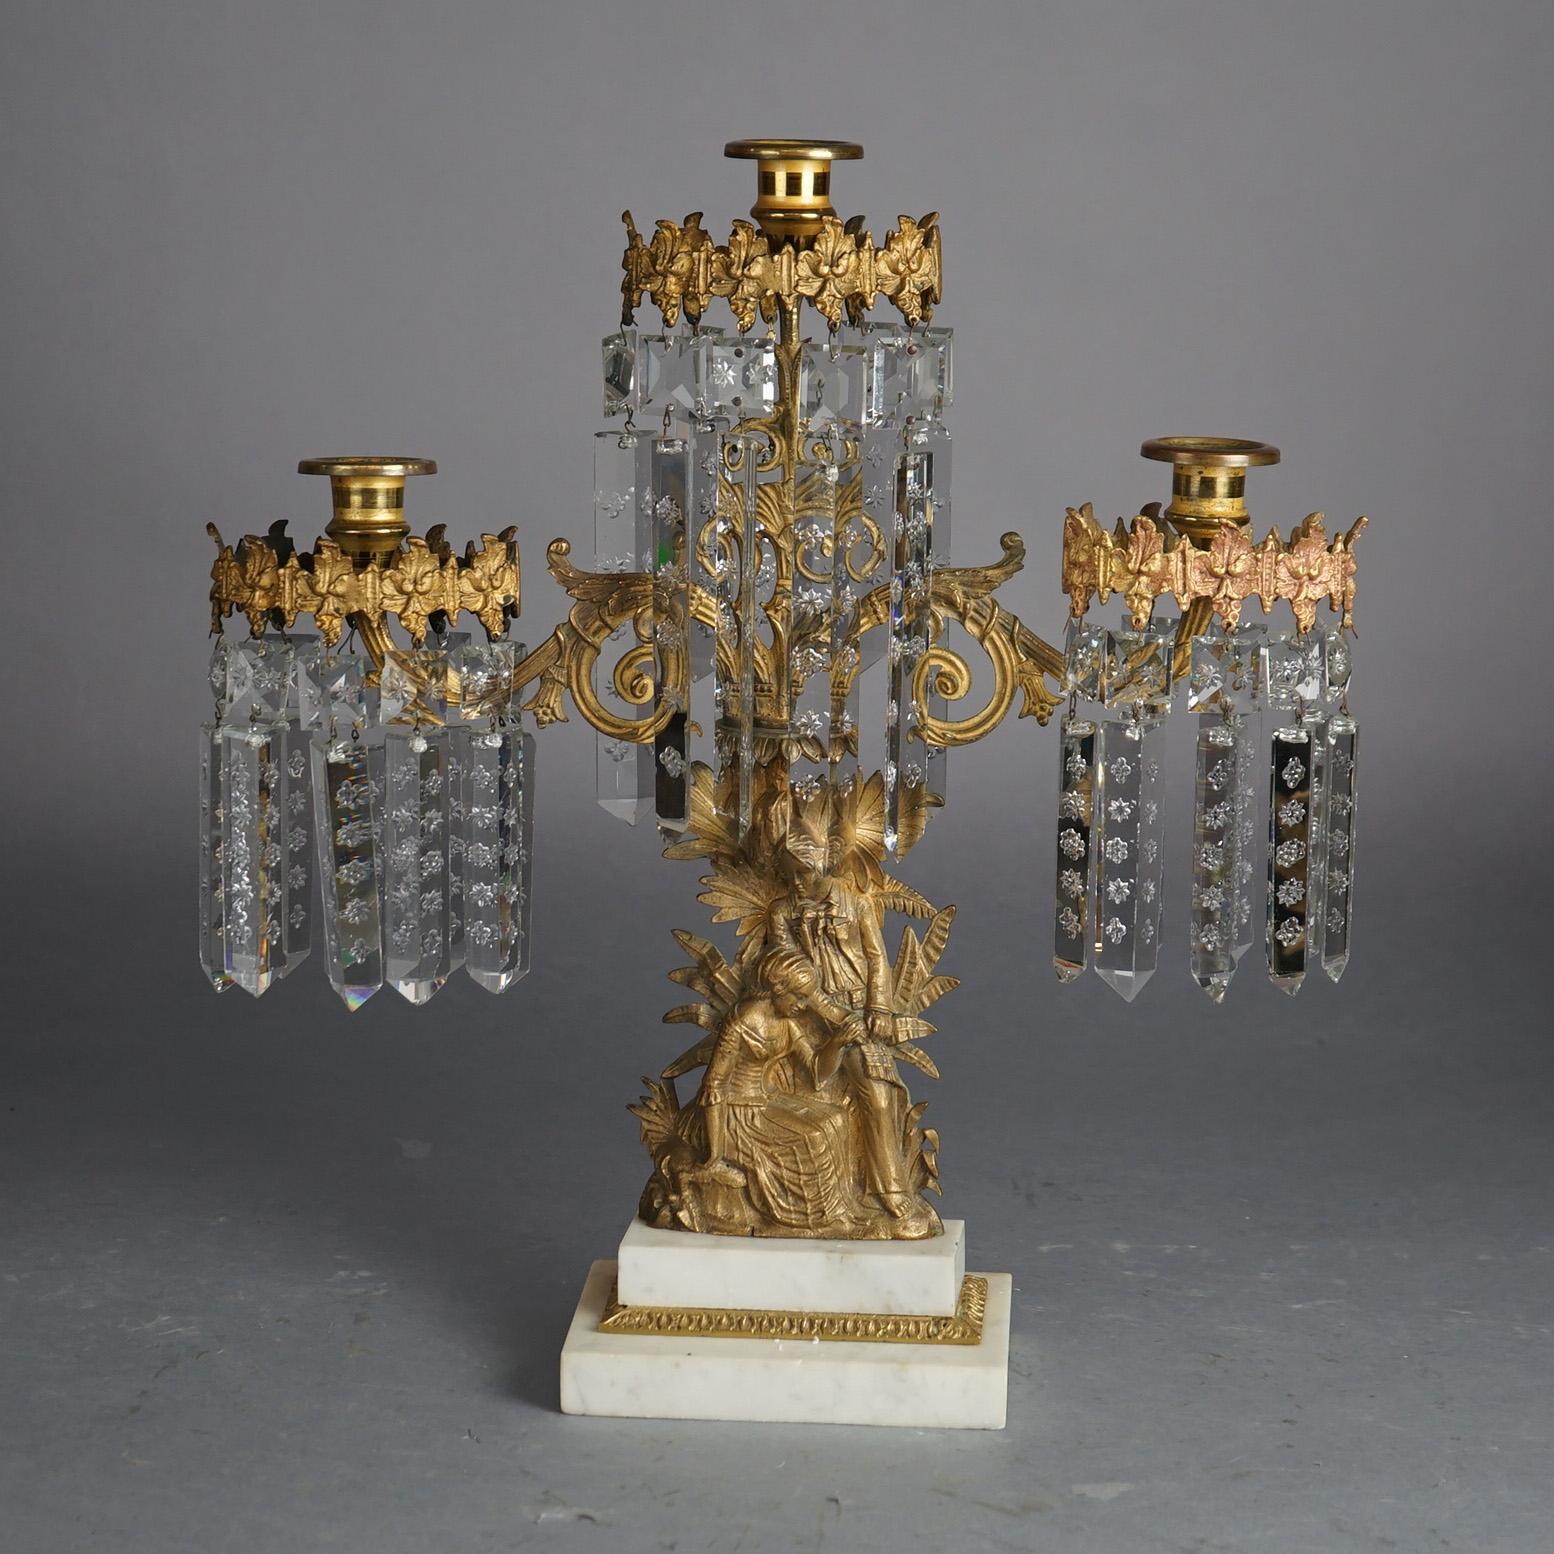 19th Century Antique Gilt Bronze American Girandole Candelabras with Marble & Crystals C1880 For Sale